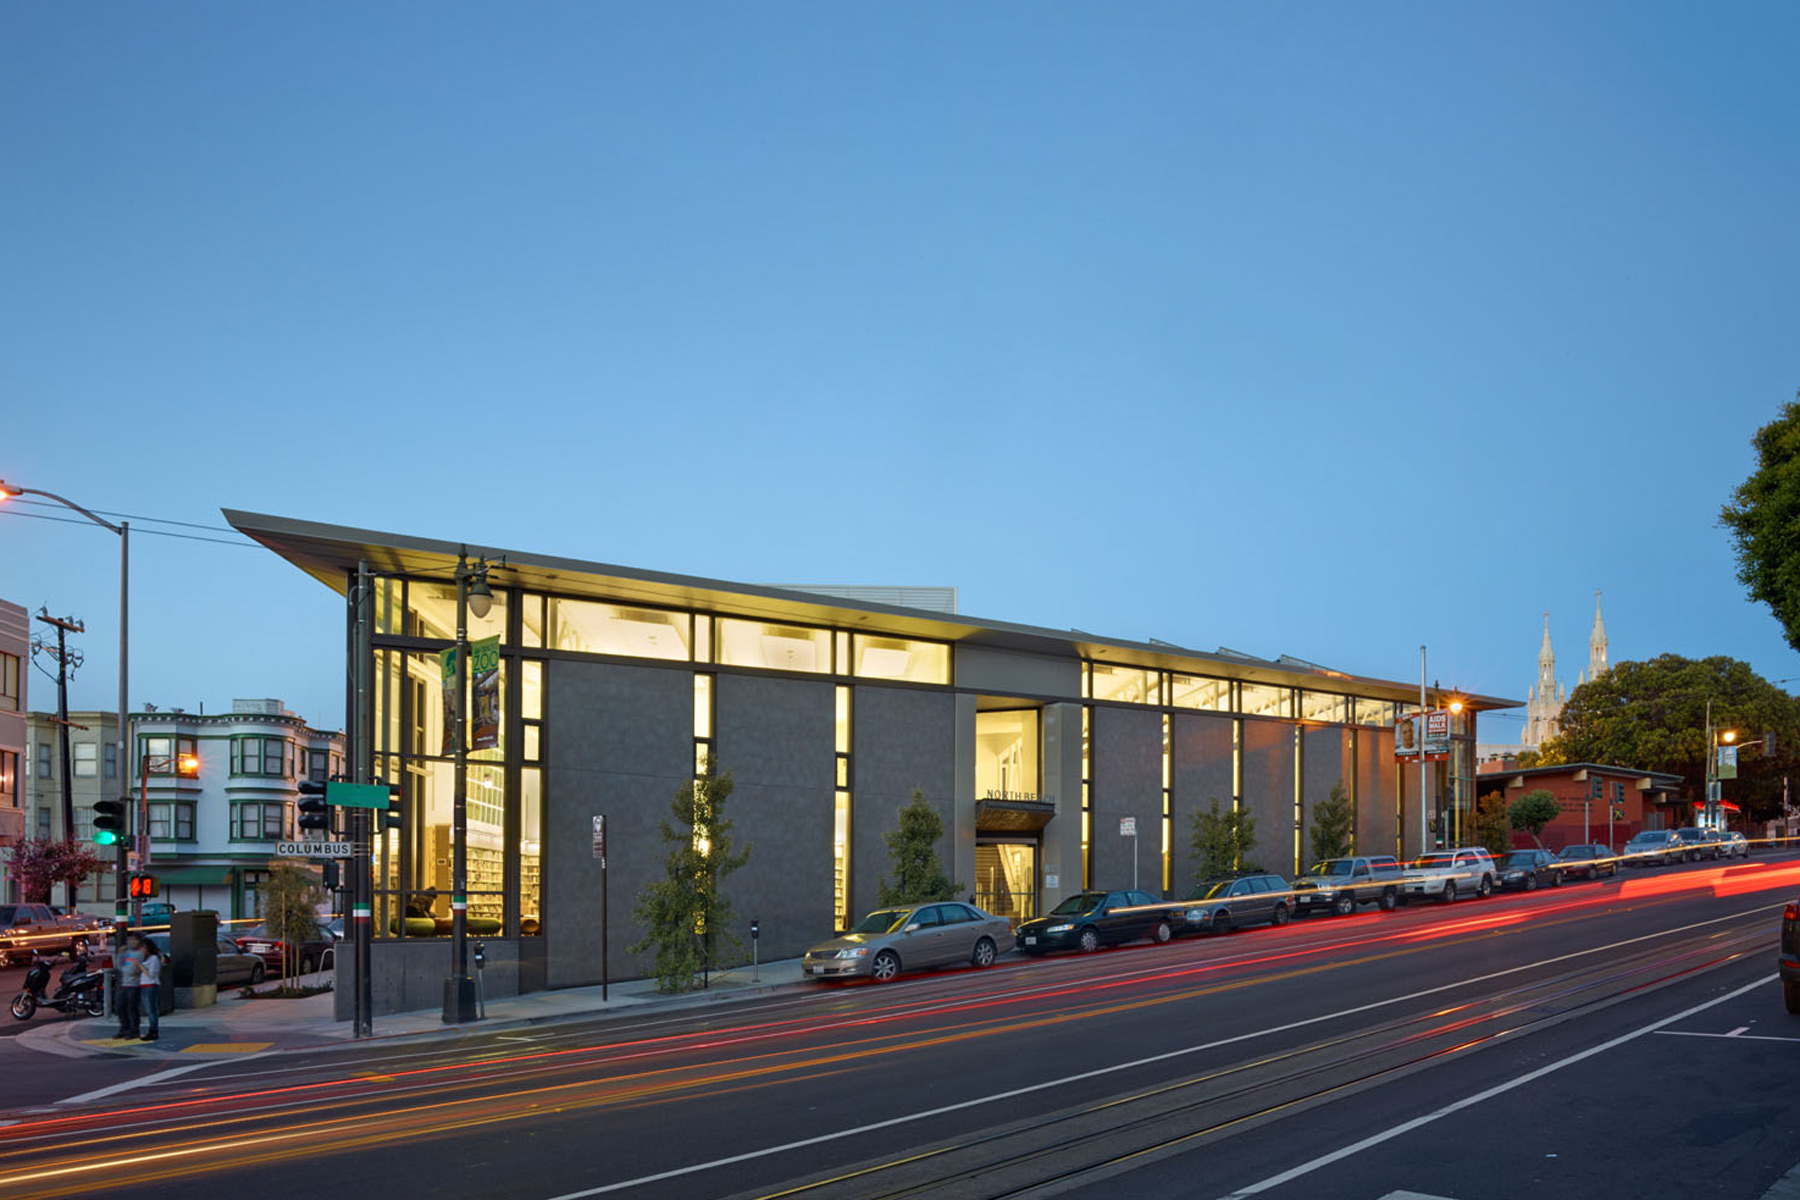 The North Beach Branch Library in San Francisco is a centerpiece for the community and, in keeping with San Francisco’s commitment to a sustainable future, is certified LEED Gold.